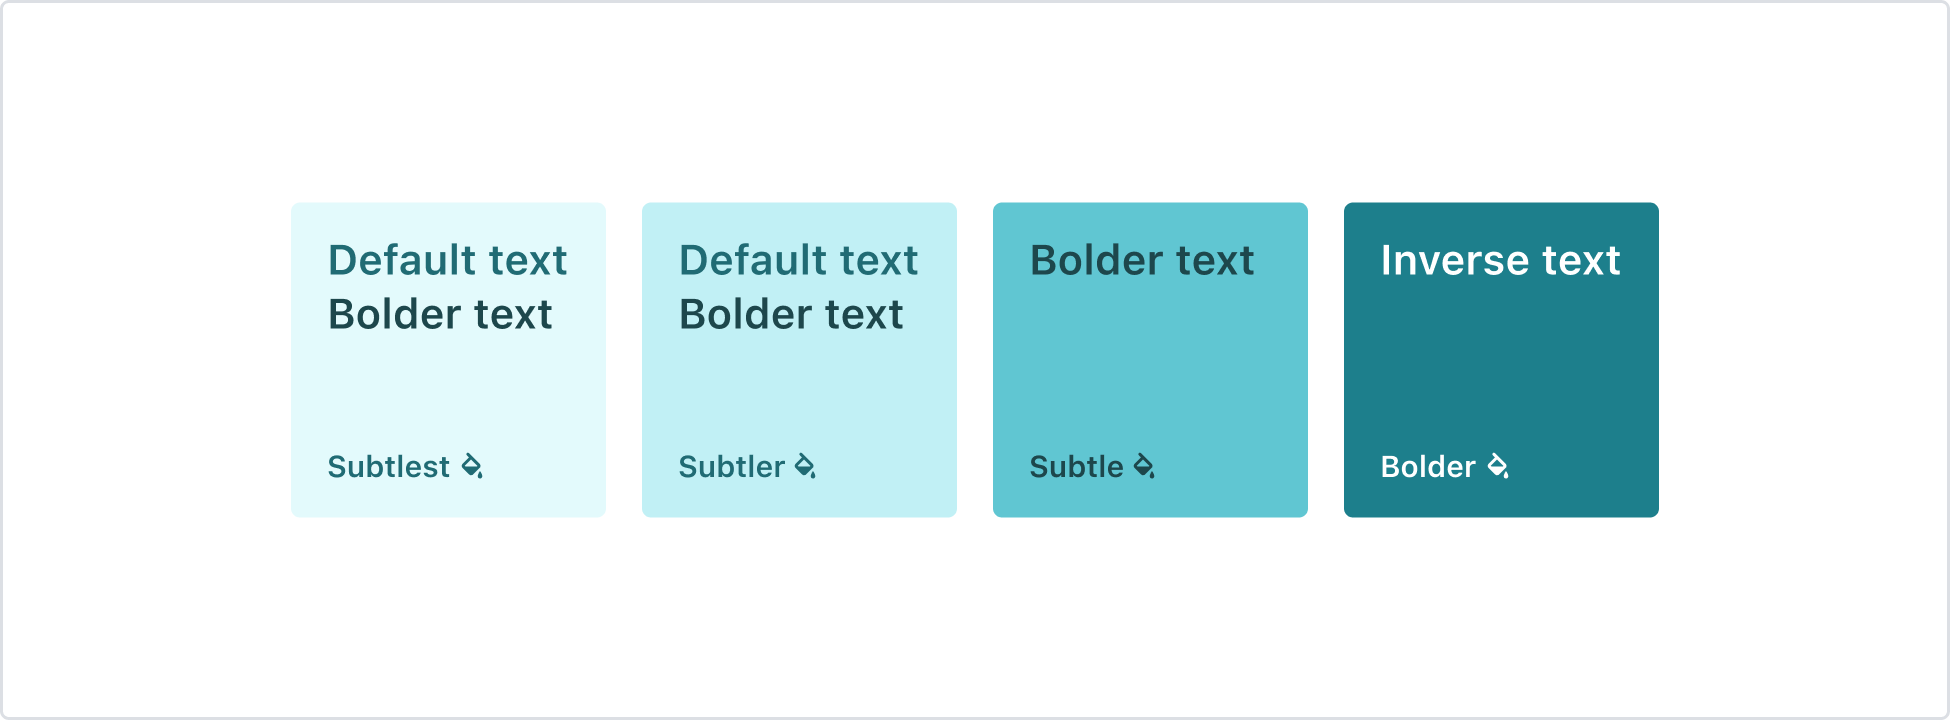 Visualization of how various teal text and background pairings can look. Default and bolder text appears on a subtlest background, default and bolder text appears on a subtler background, bolder text appears on a subtle background, and inverse text appears on a bolder background.